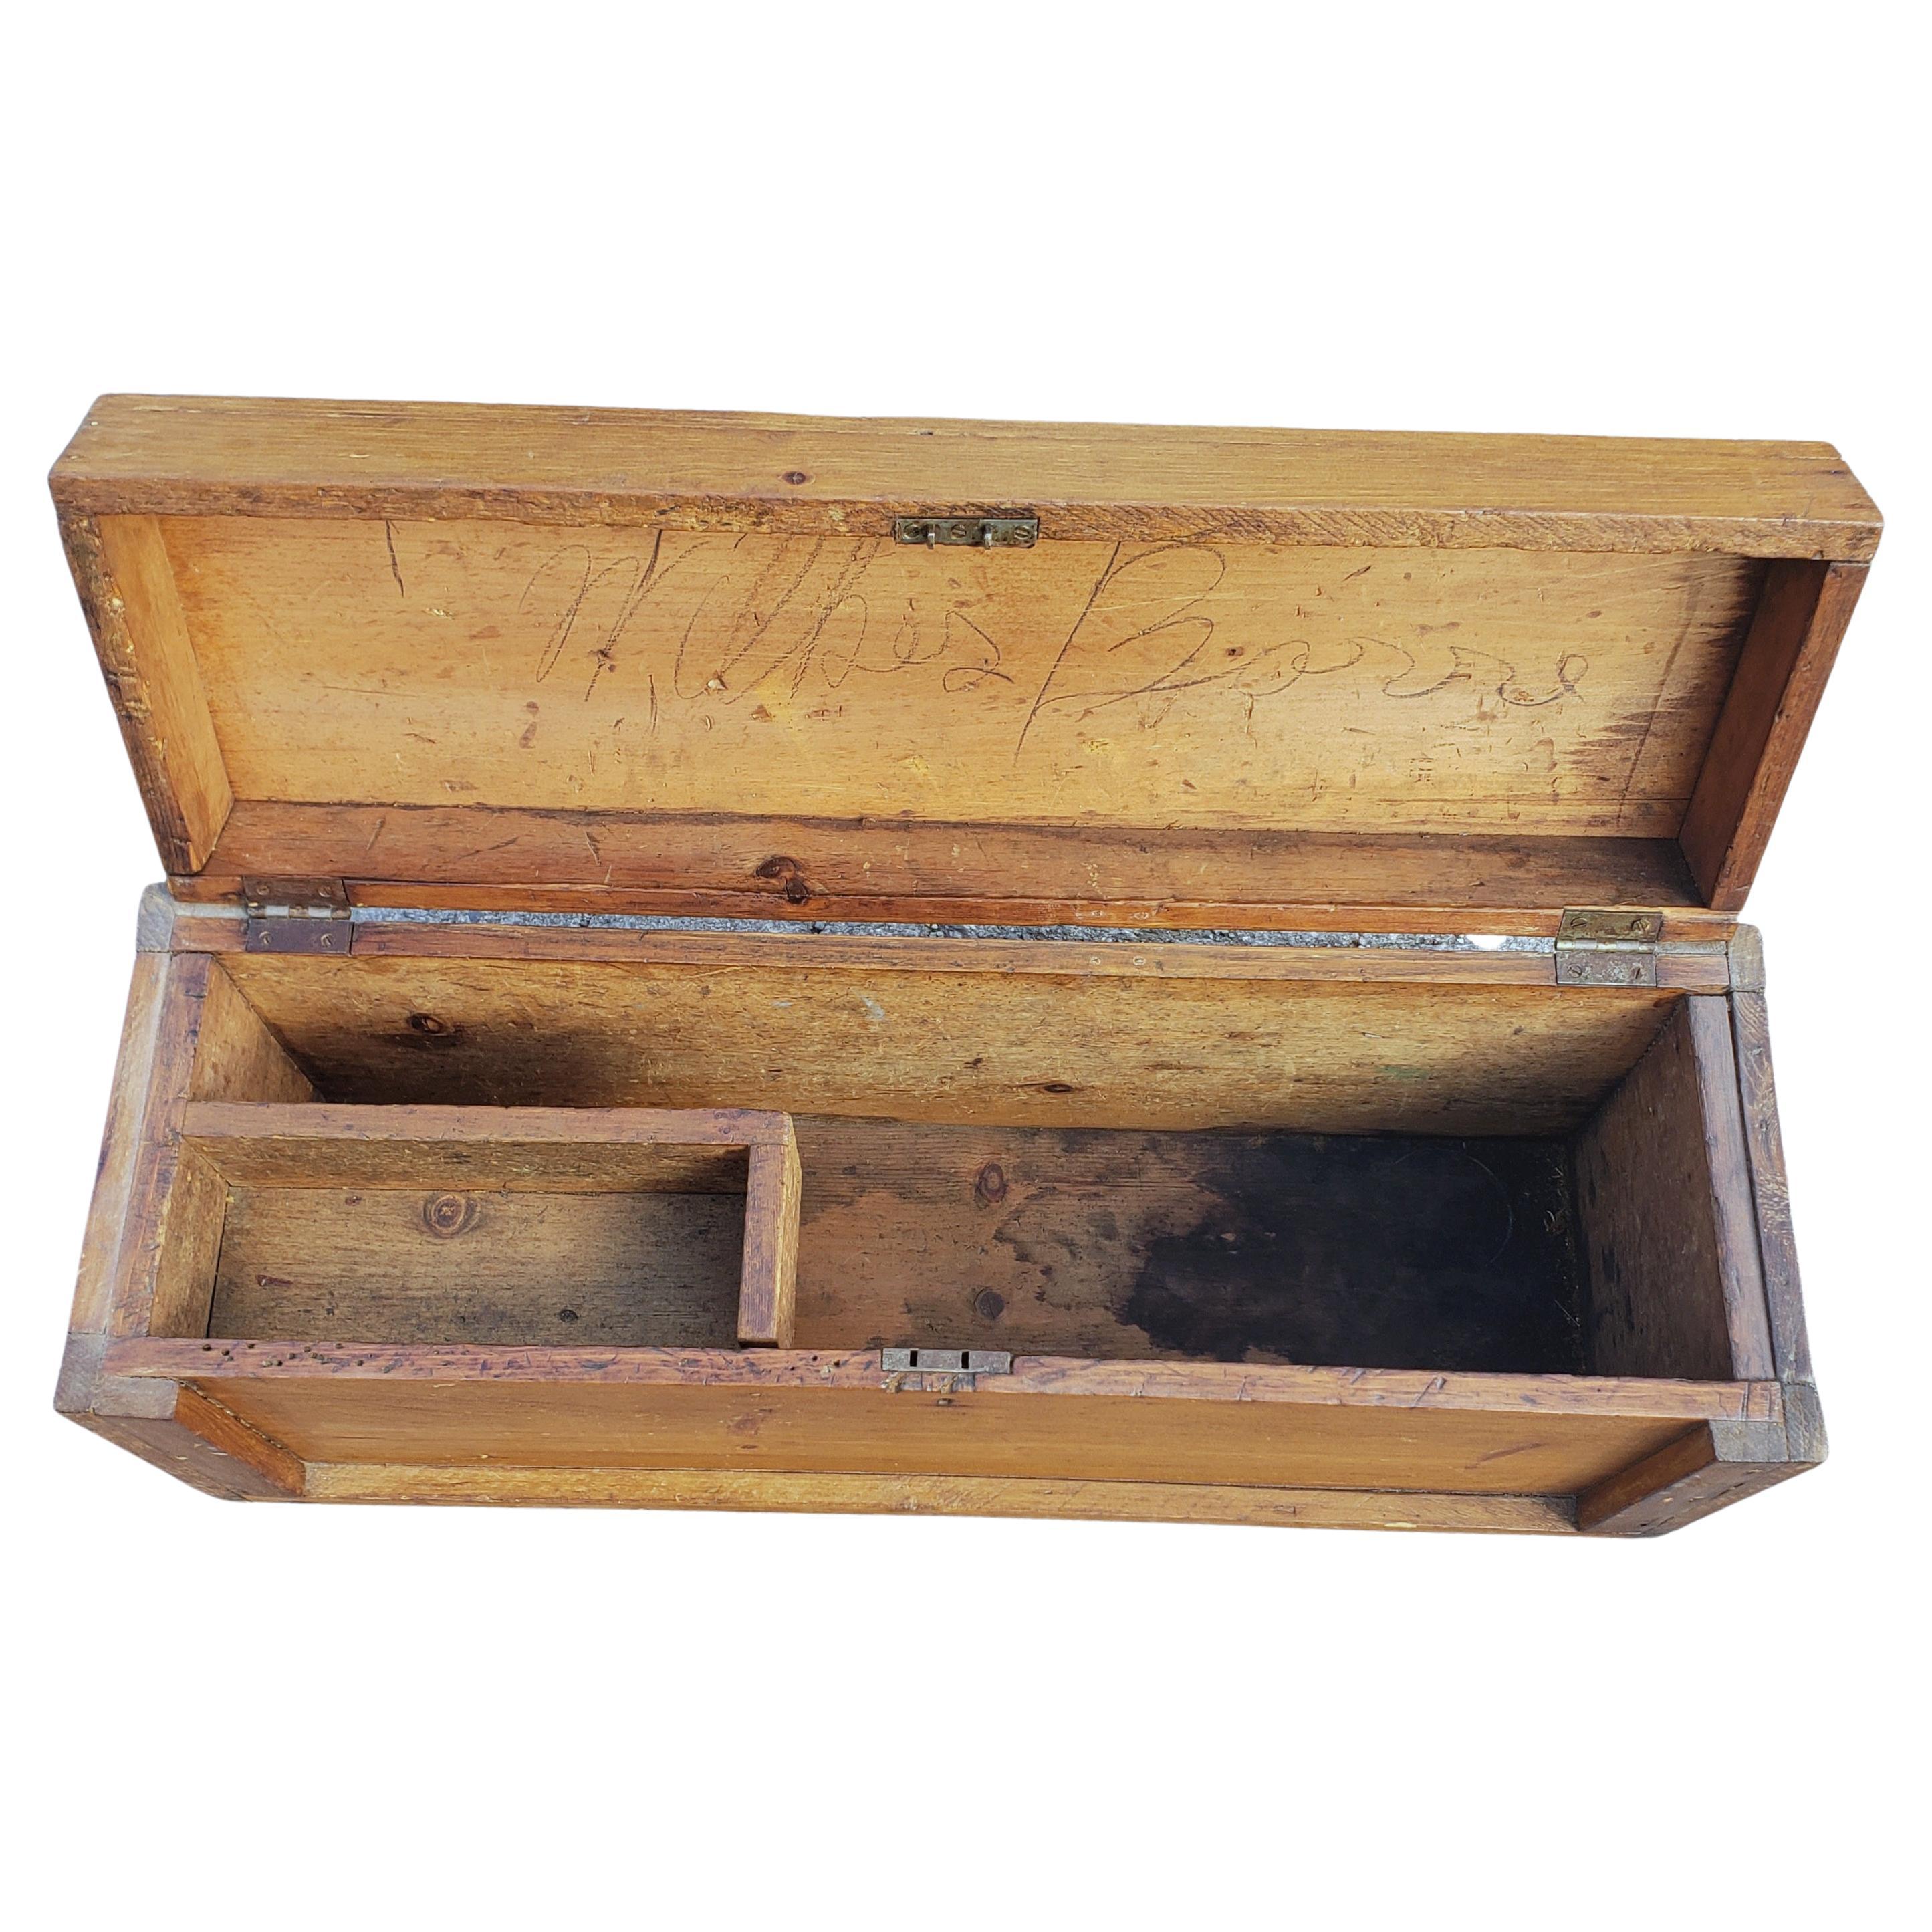 Early 20th Century American Primitive Wooden Tool Box For Sale 2